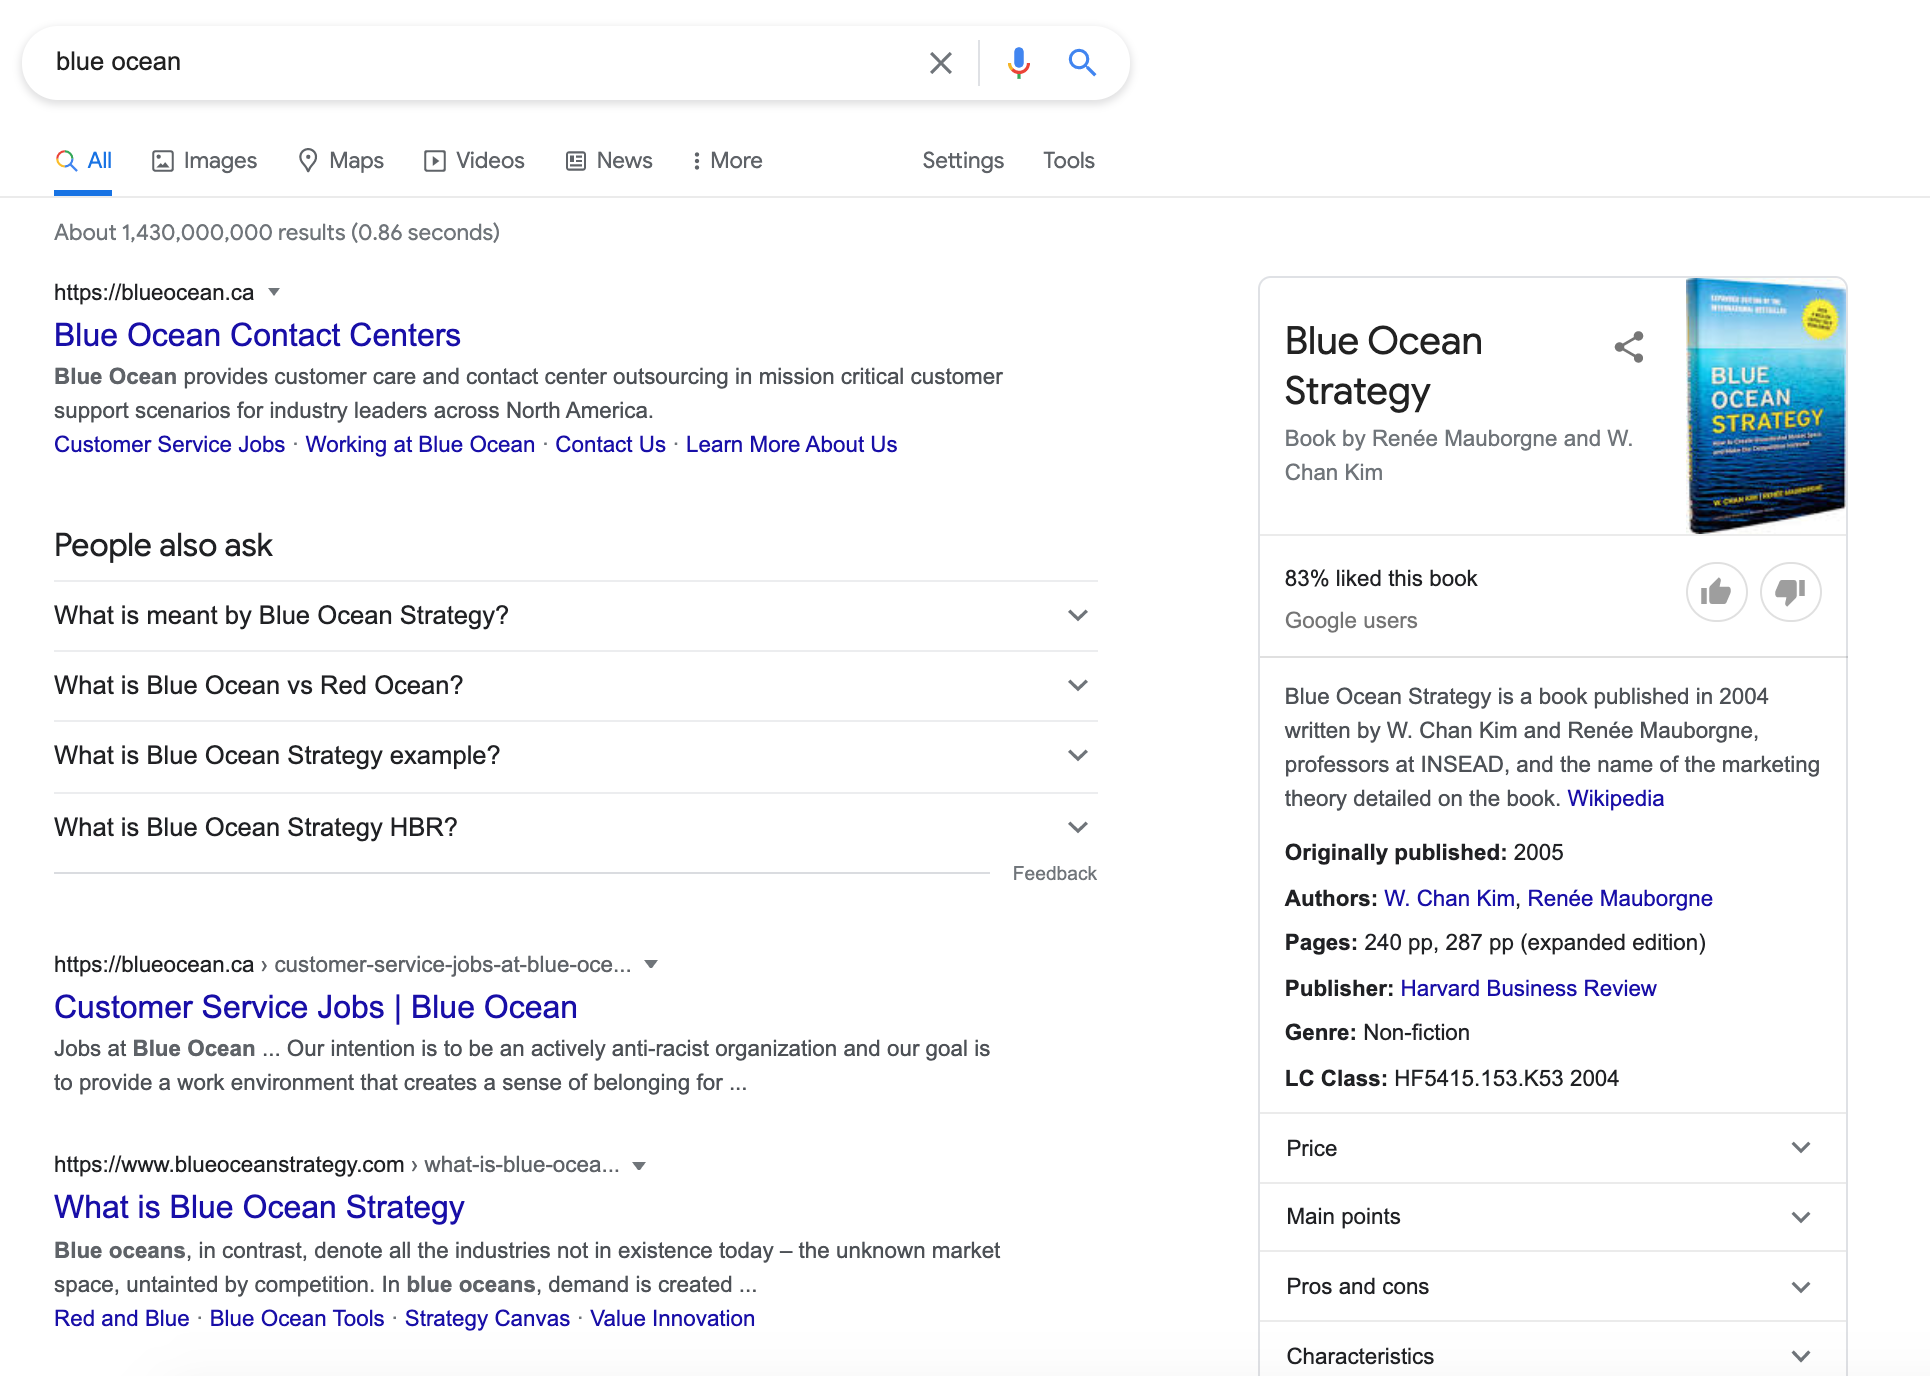 How to Optimize for Branded Organic Search Traffic